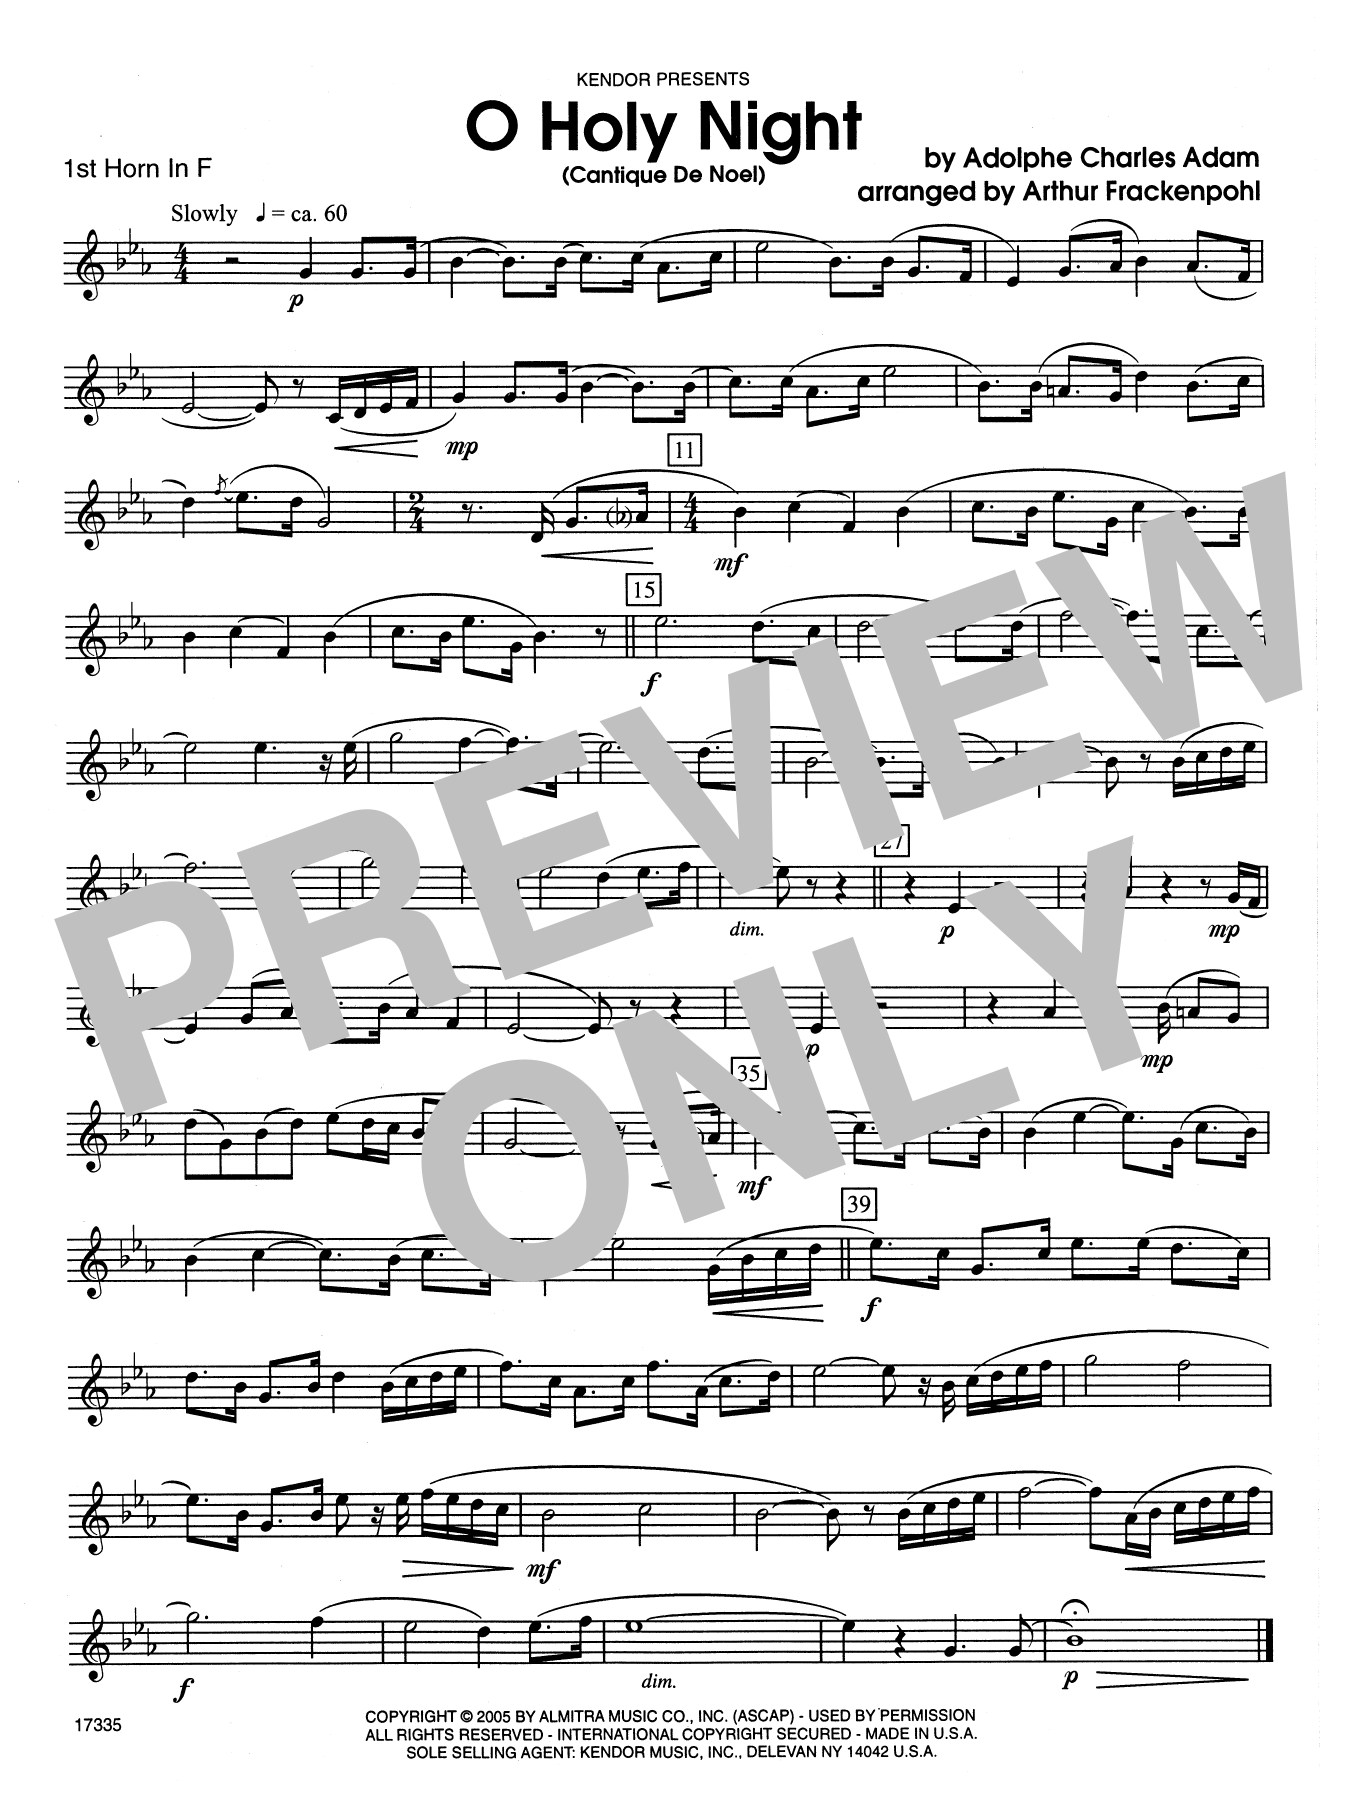 Arthur Frackenpohl O Holy Night (Cantique de Noel) - 1st Horn in F sheet music notes and chords. Download Printable PDF.